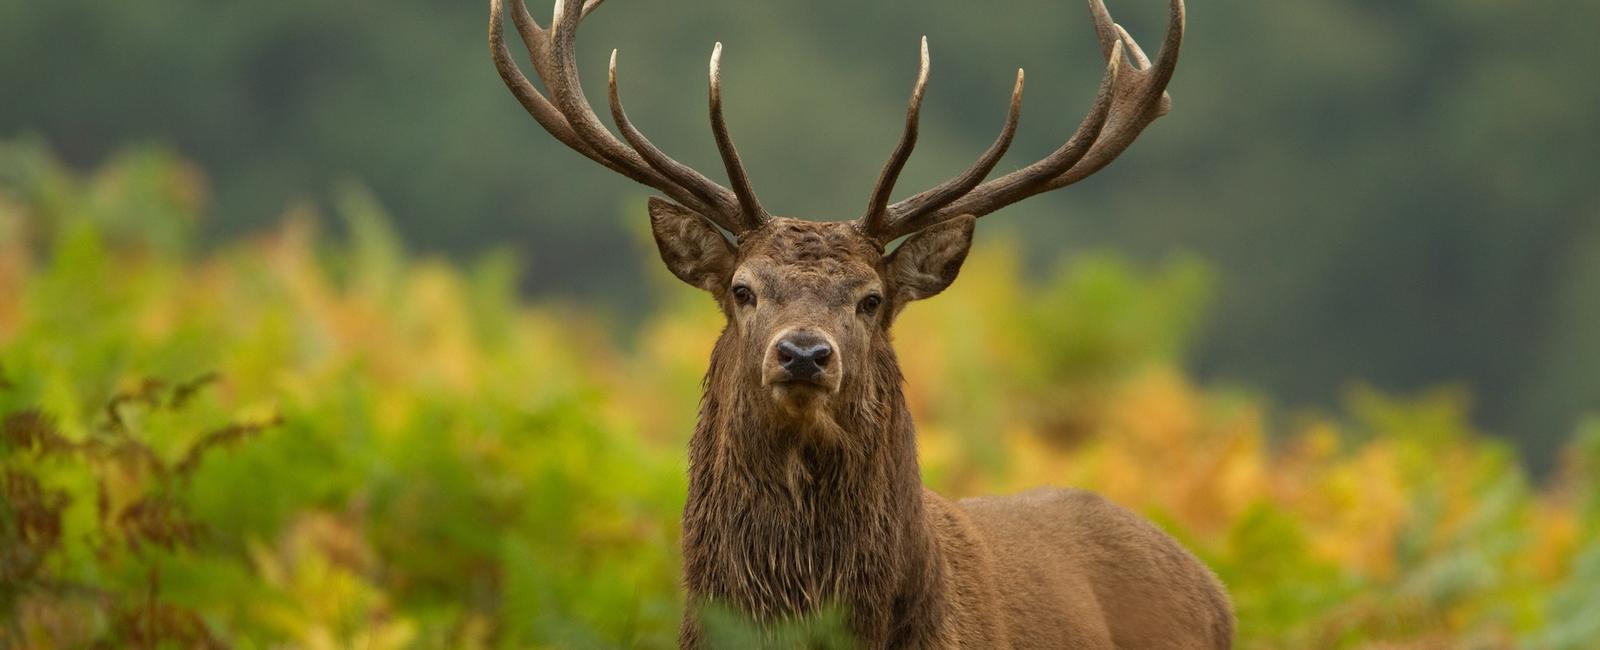 The largest mammal in the uk is the red deer various species of deer and rabbits are common in the uk